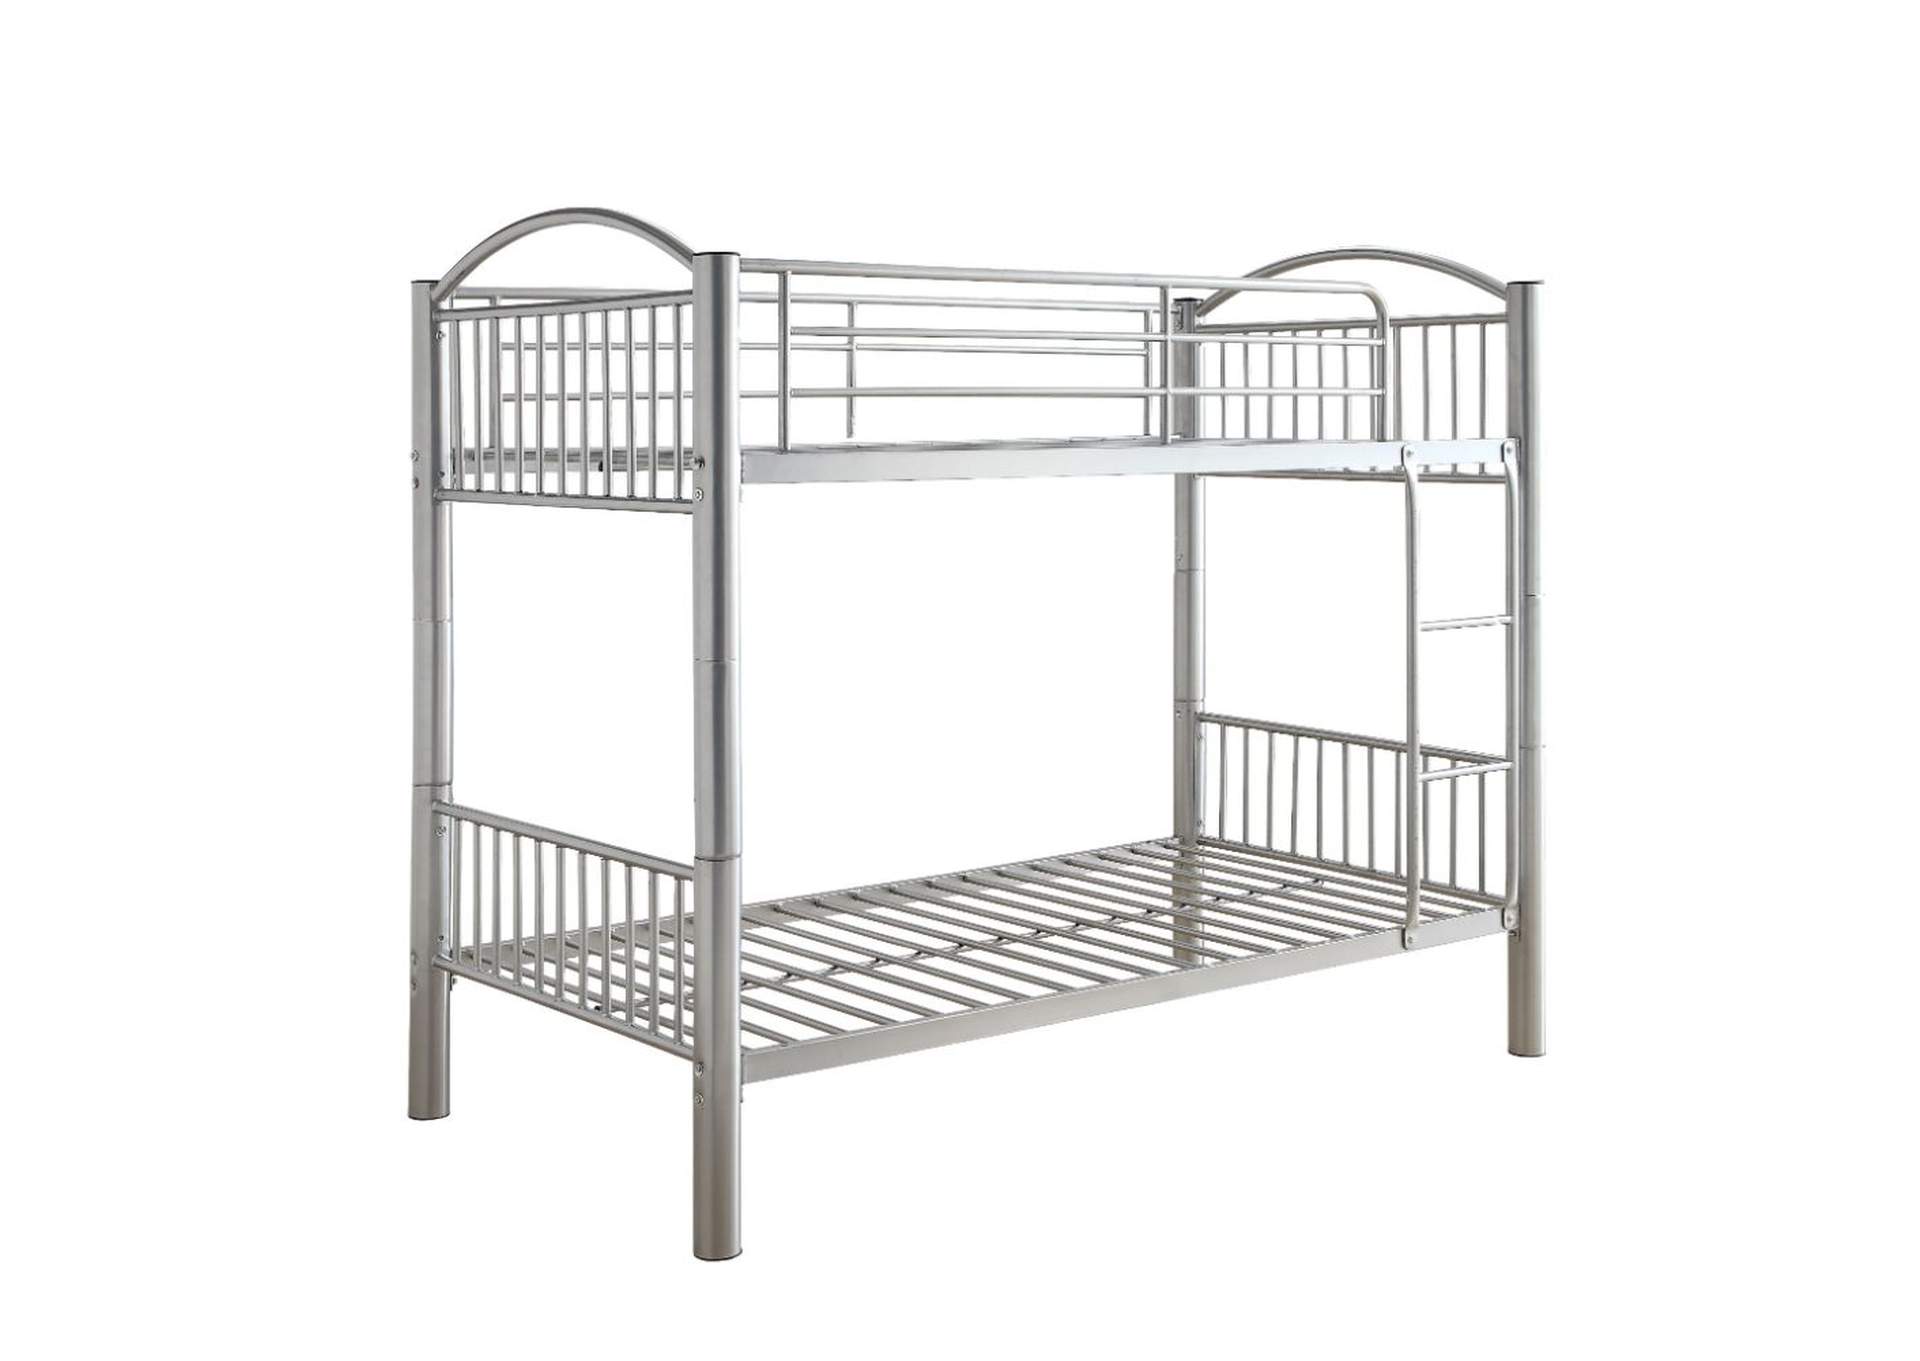 Cayelynn Twin/twin bunk bed,Acme